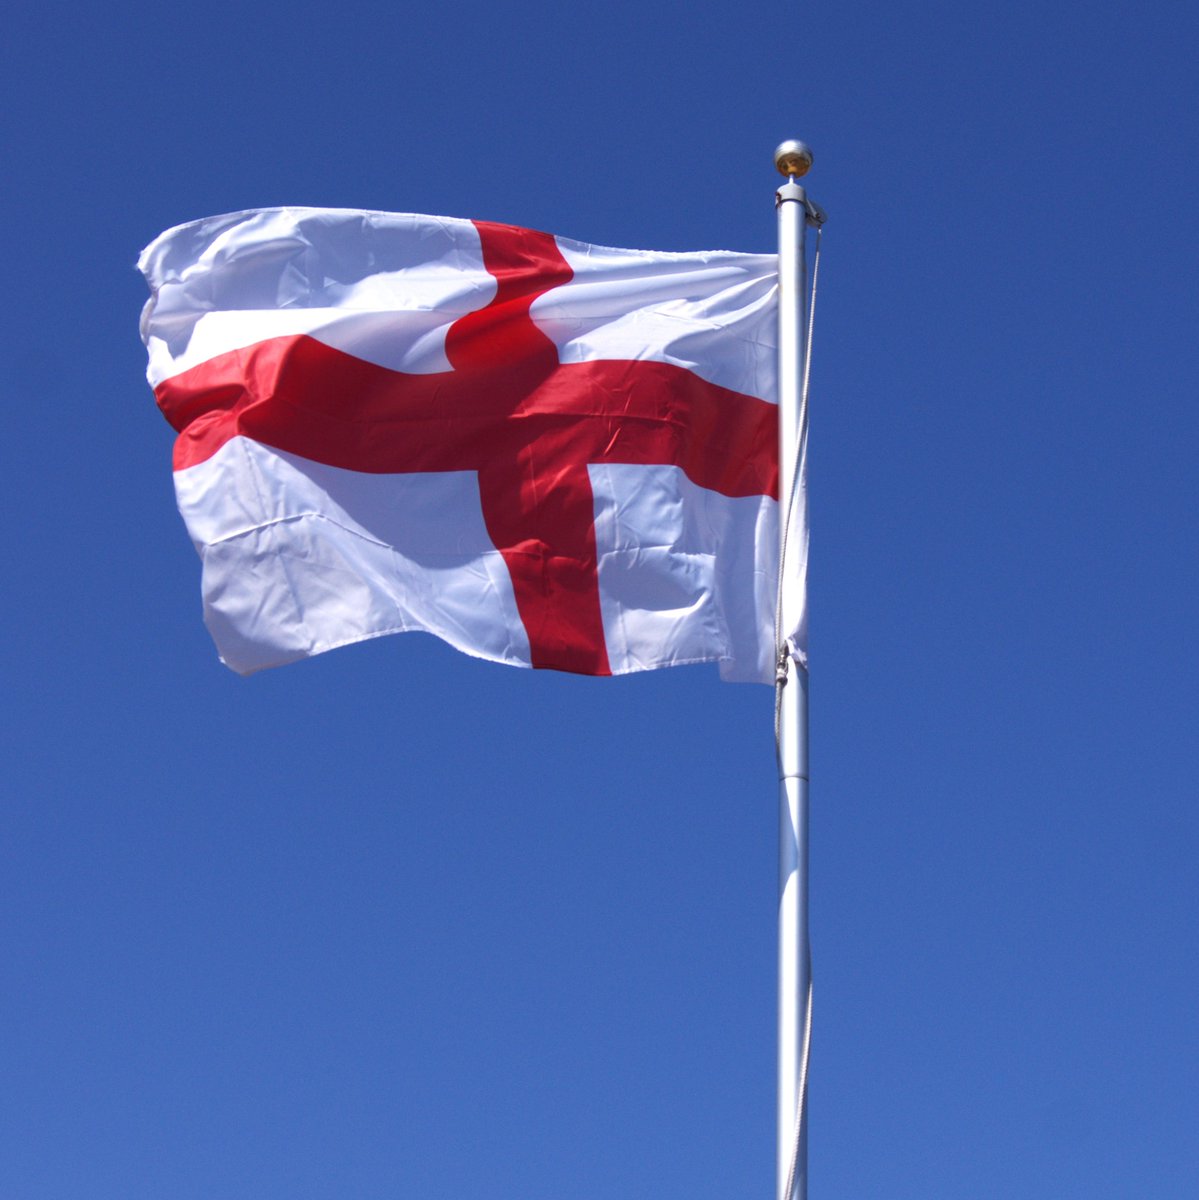 Happy St George’s Day, Sheffield! #Sheffield #StGeorgesDay